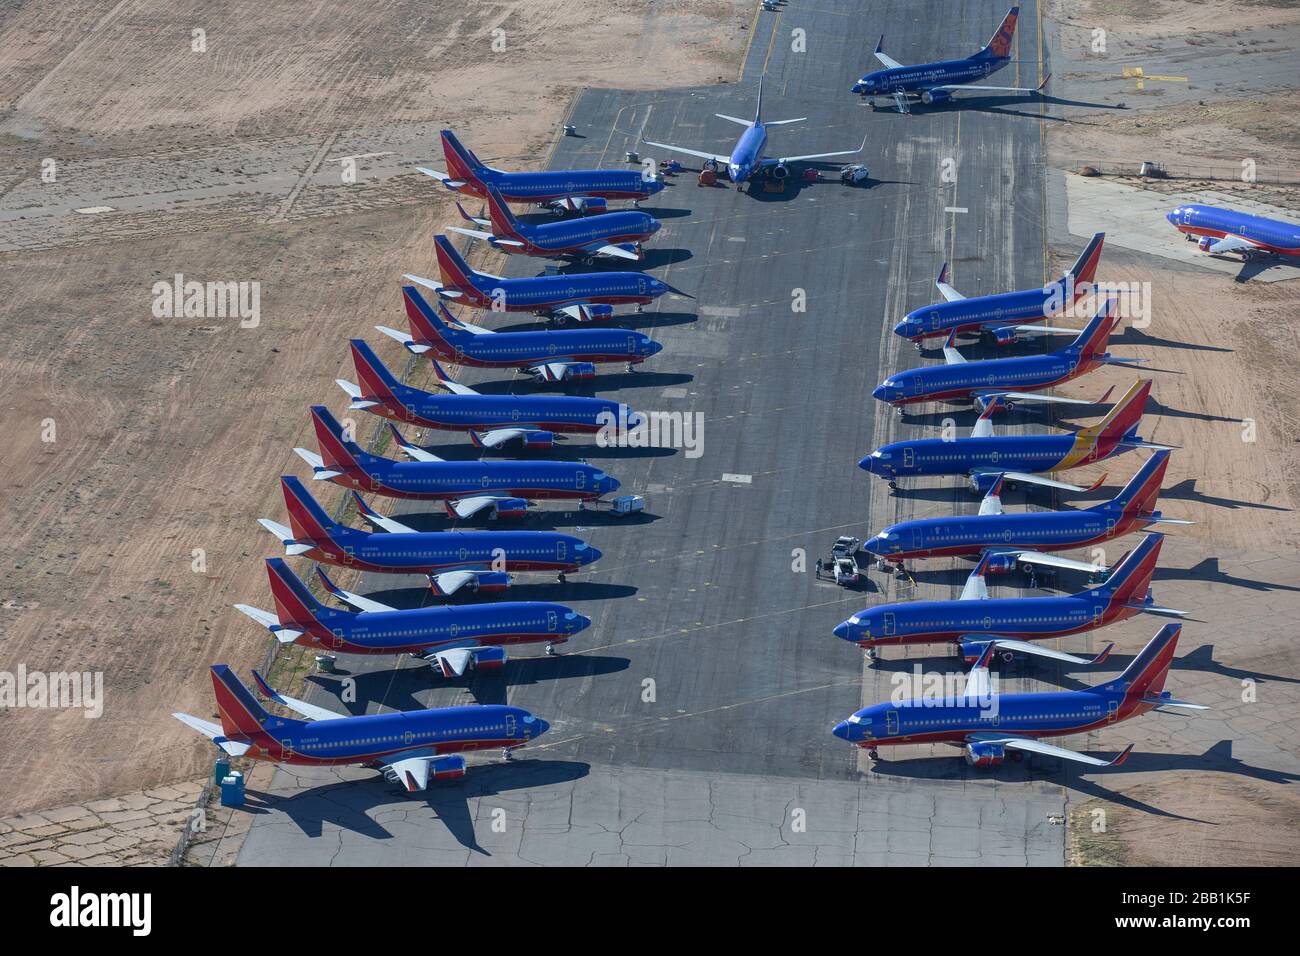 Southwest Airlines Boeing Max 737-8 are seen stored at Southern California Logistics Airport on Friday, January 10, 2020 in Victorville, California, USA. (IOS/ESPA-Images) (Photo by IOS/Espa-Images) Stock Photo